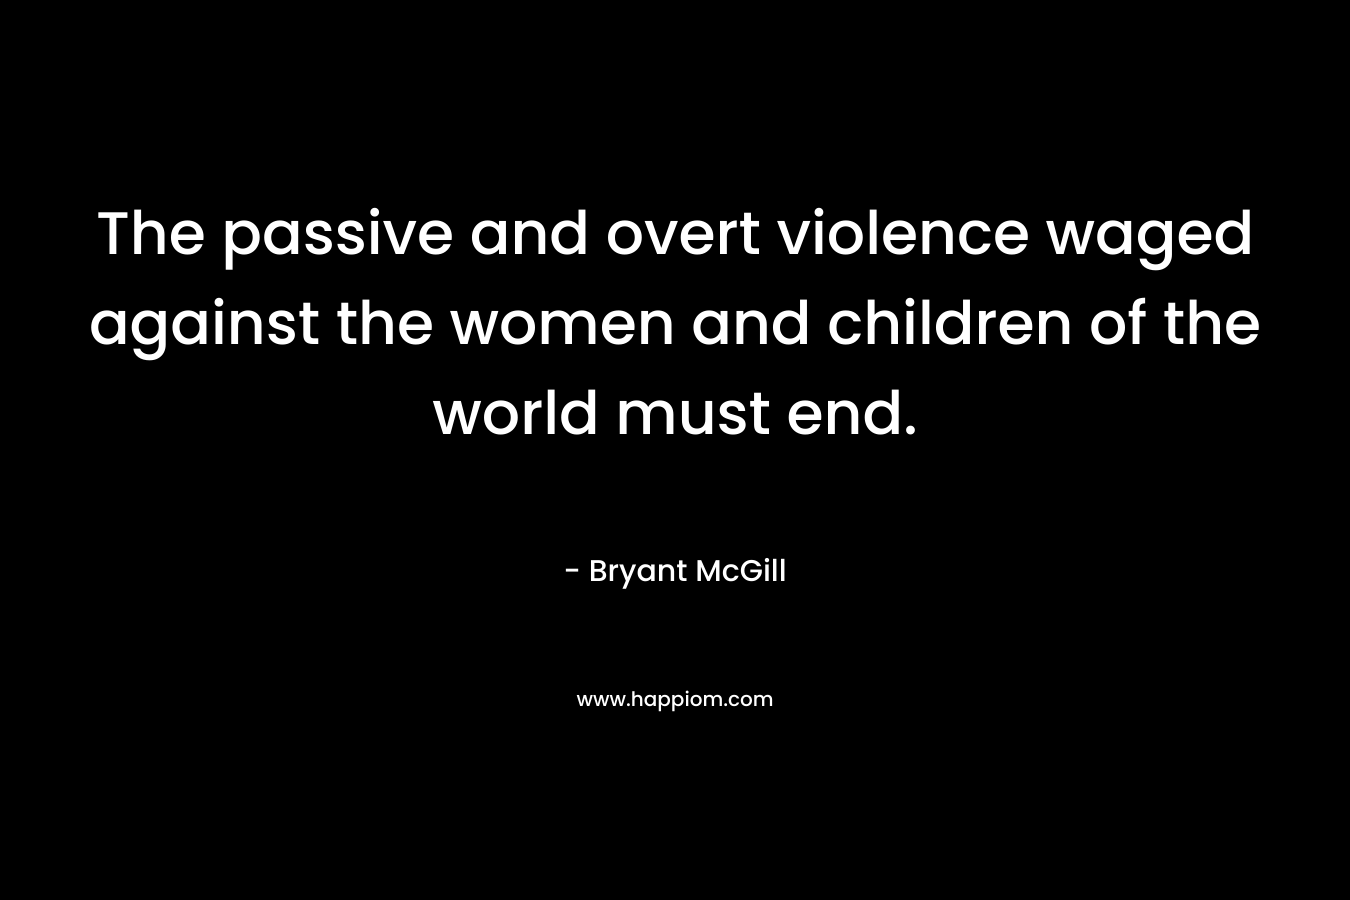 The passive and overt violence waged against the women and children of the world must end.